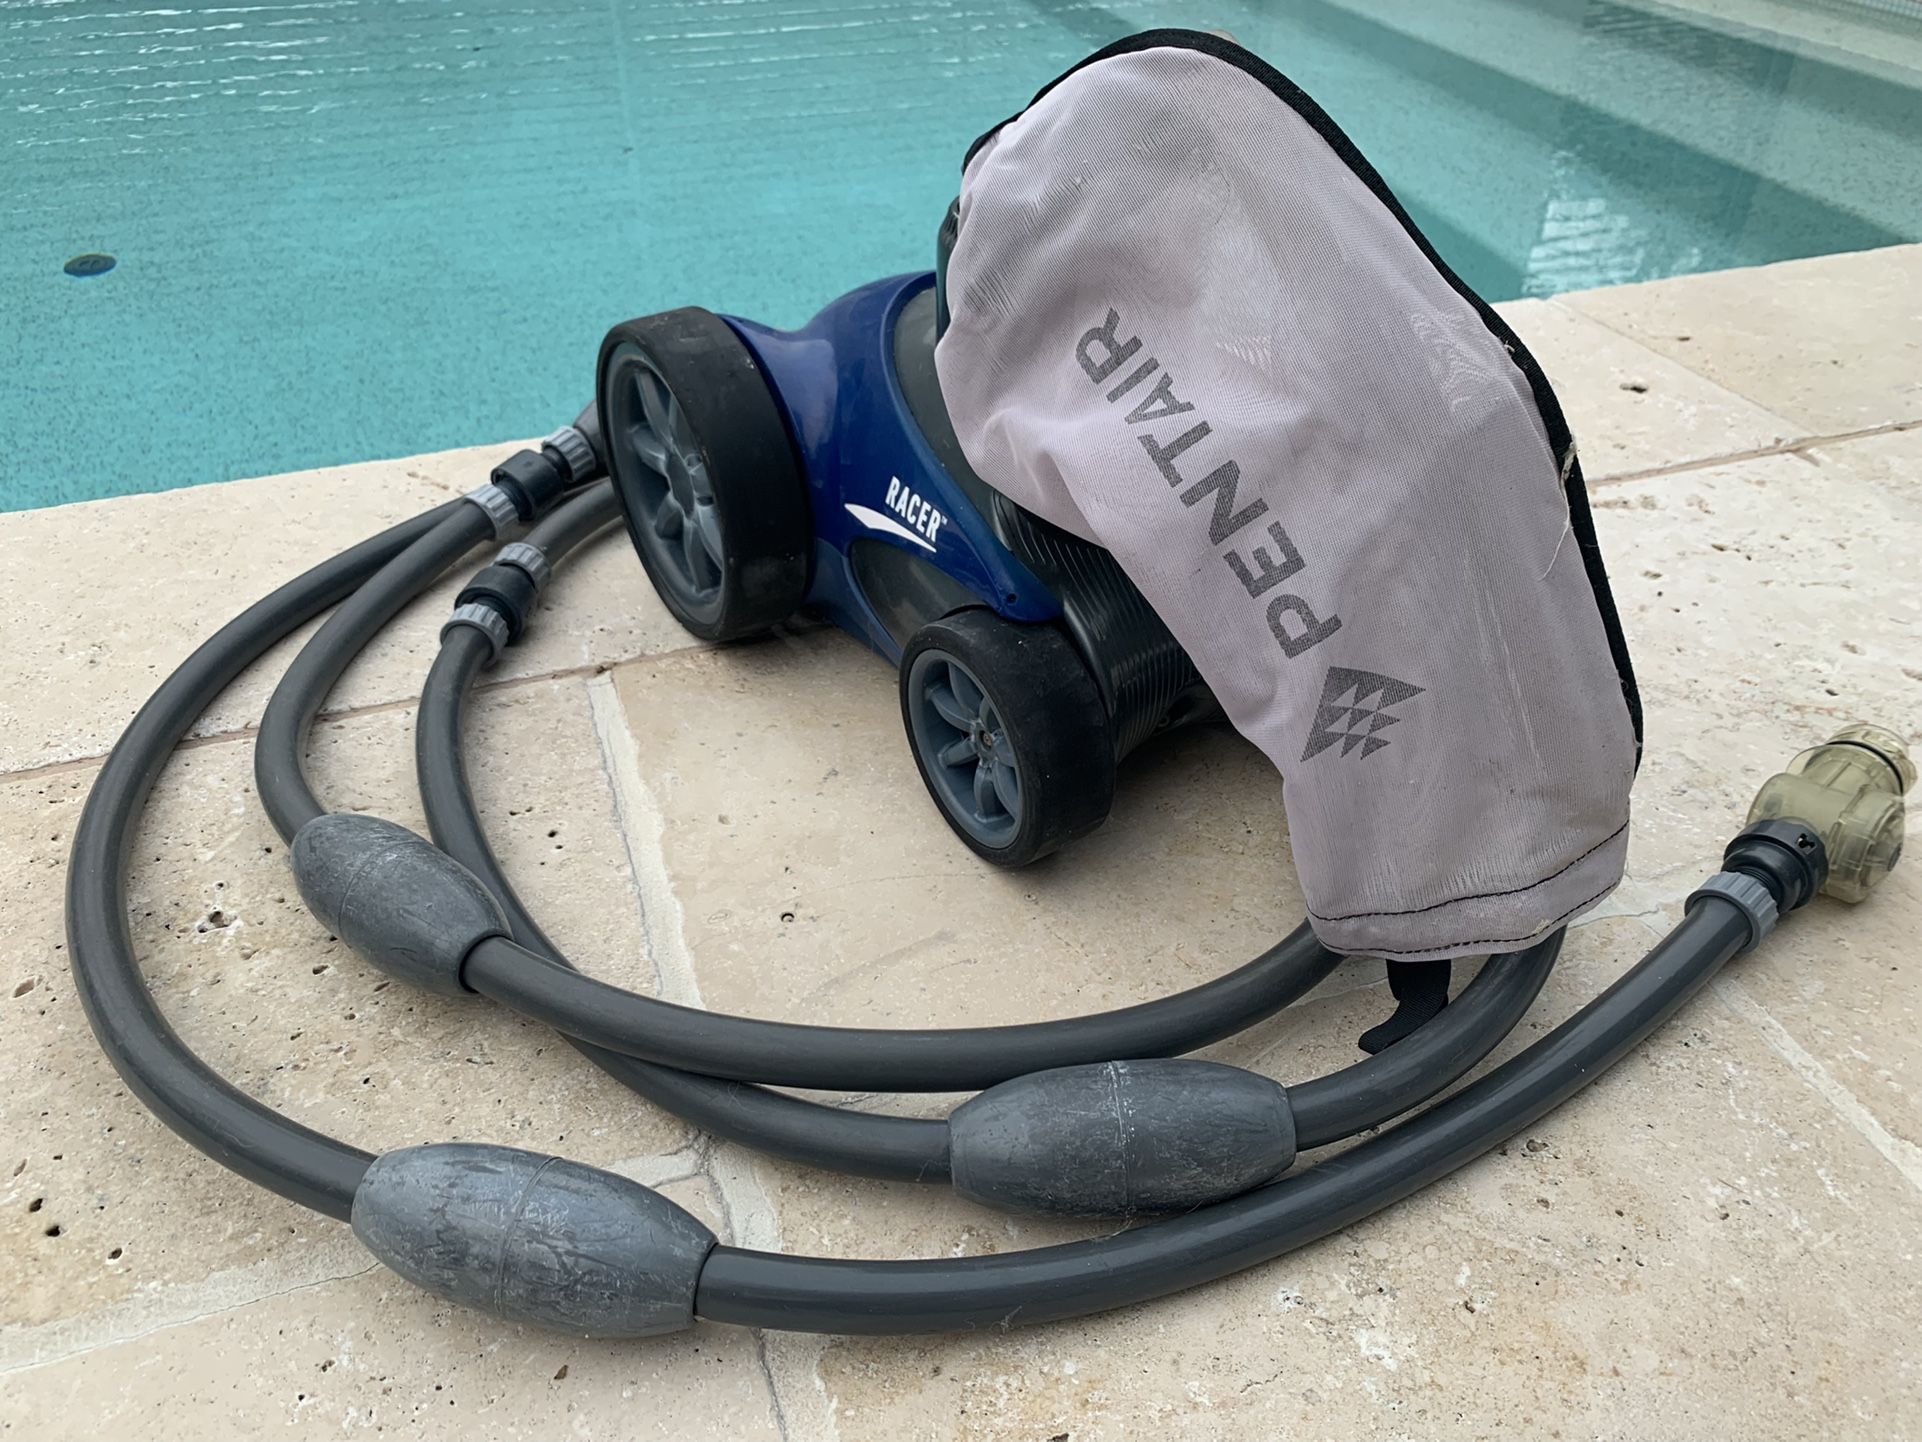 Pentair Racer Automatic Pool Cleaner with Hose